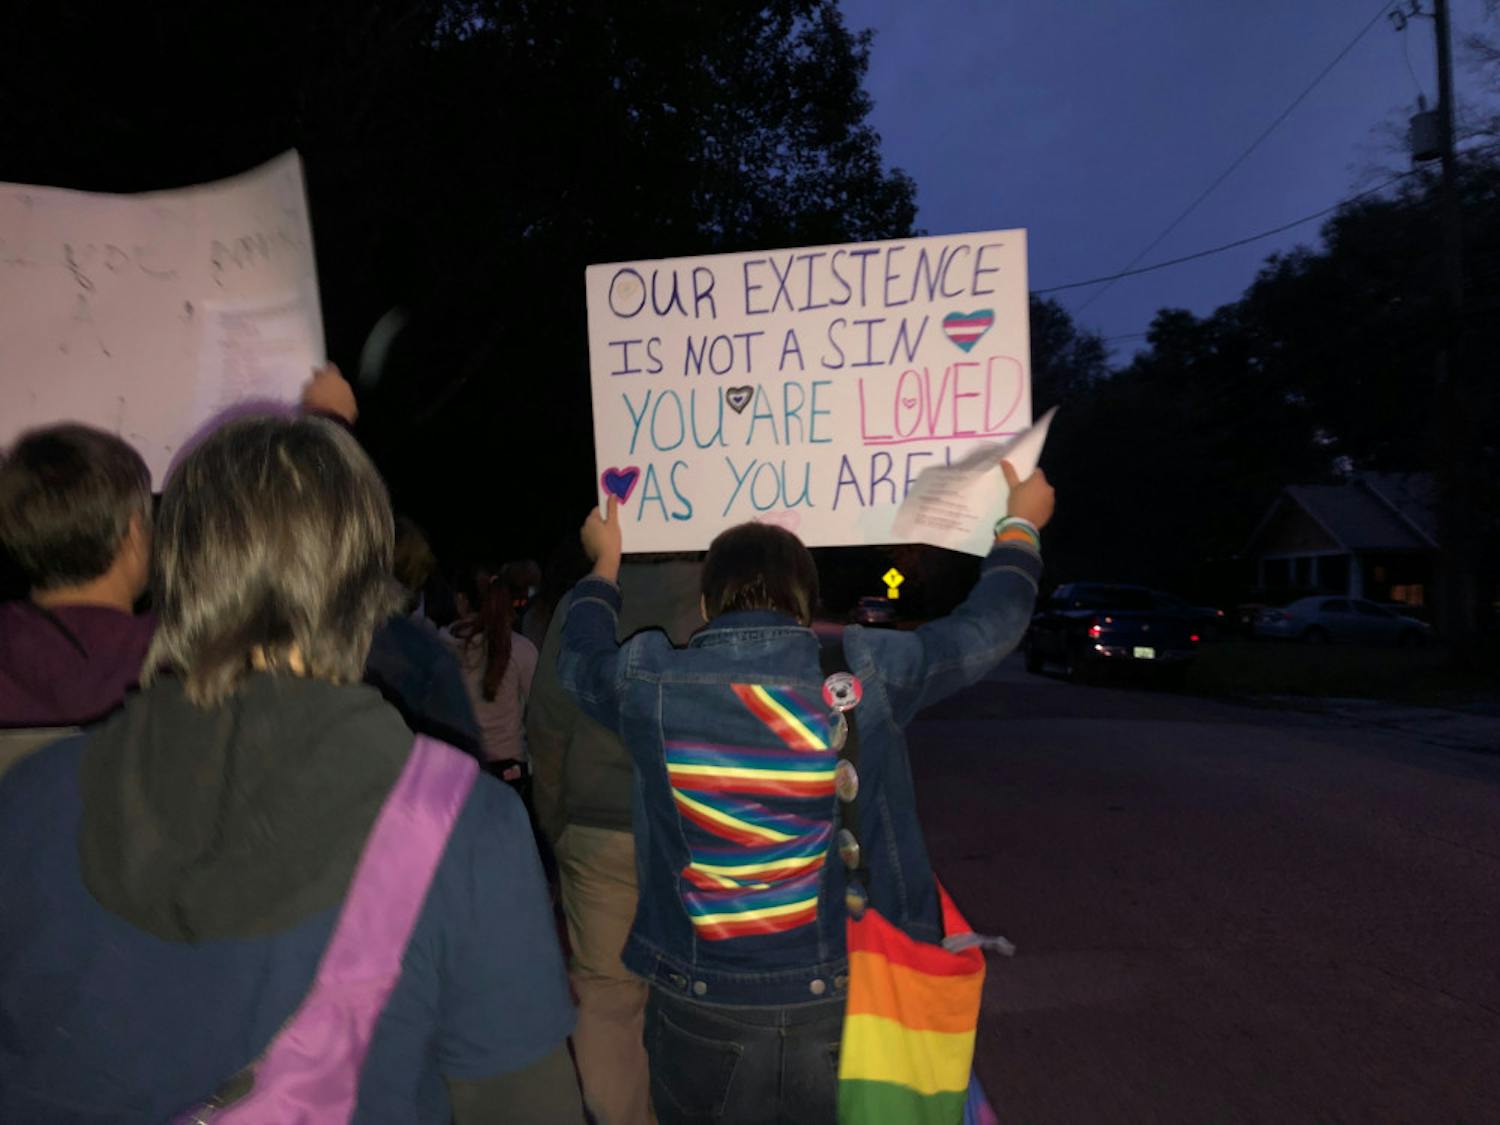 Gainesville Free2BU protesters carry hand-made signs Friday evening as they march towards the Ignite Life Center, whose members they say use conversion therapy on the LGBTQ+ community